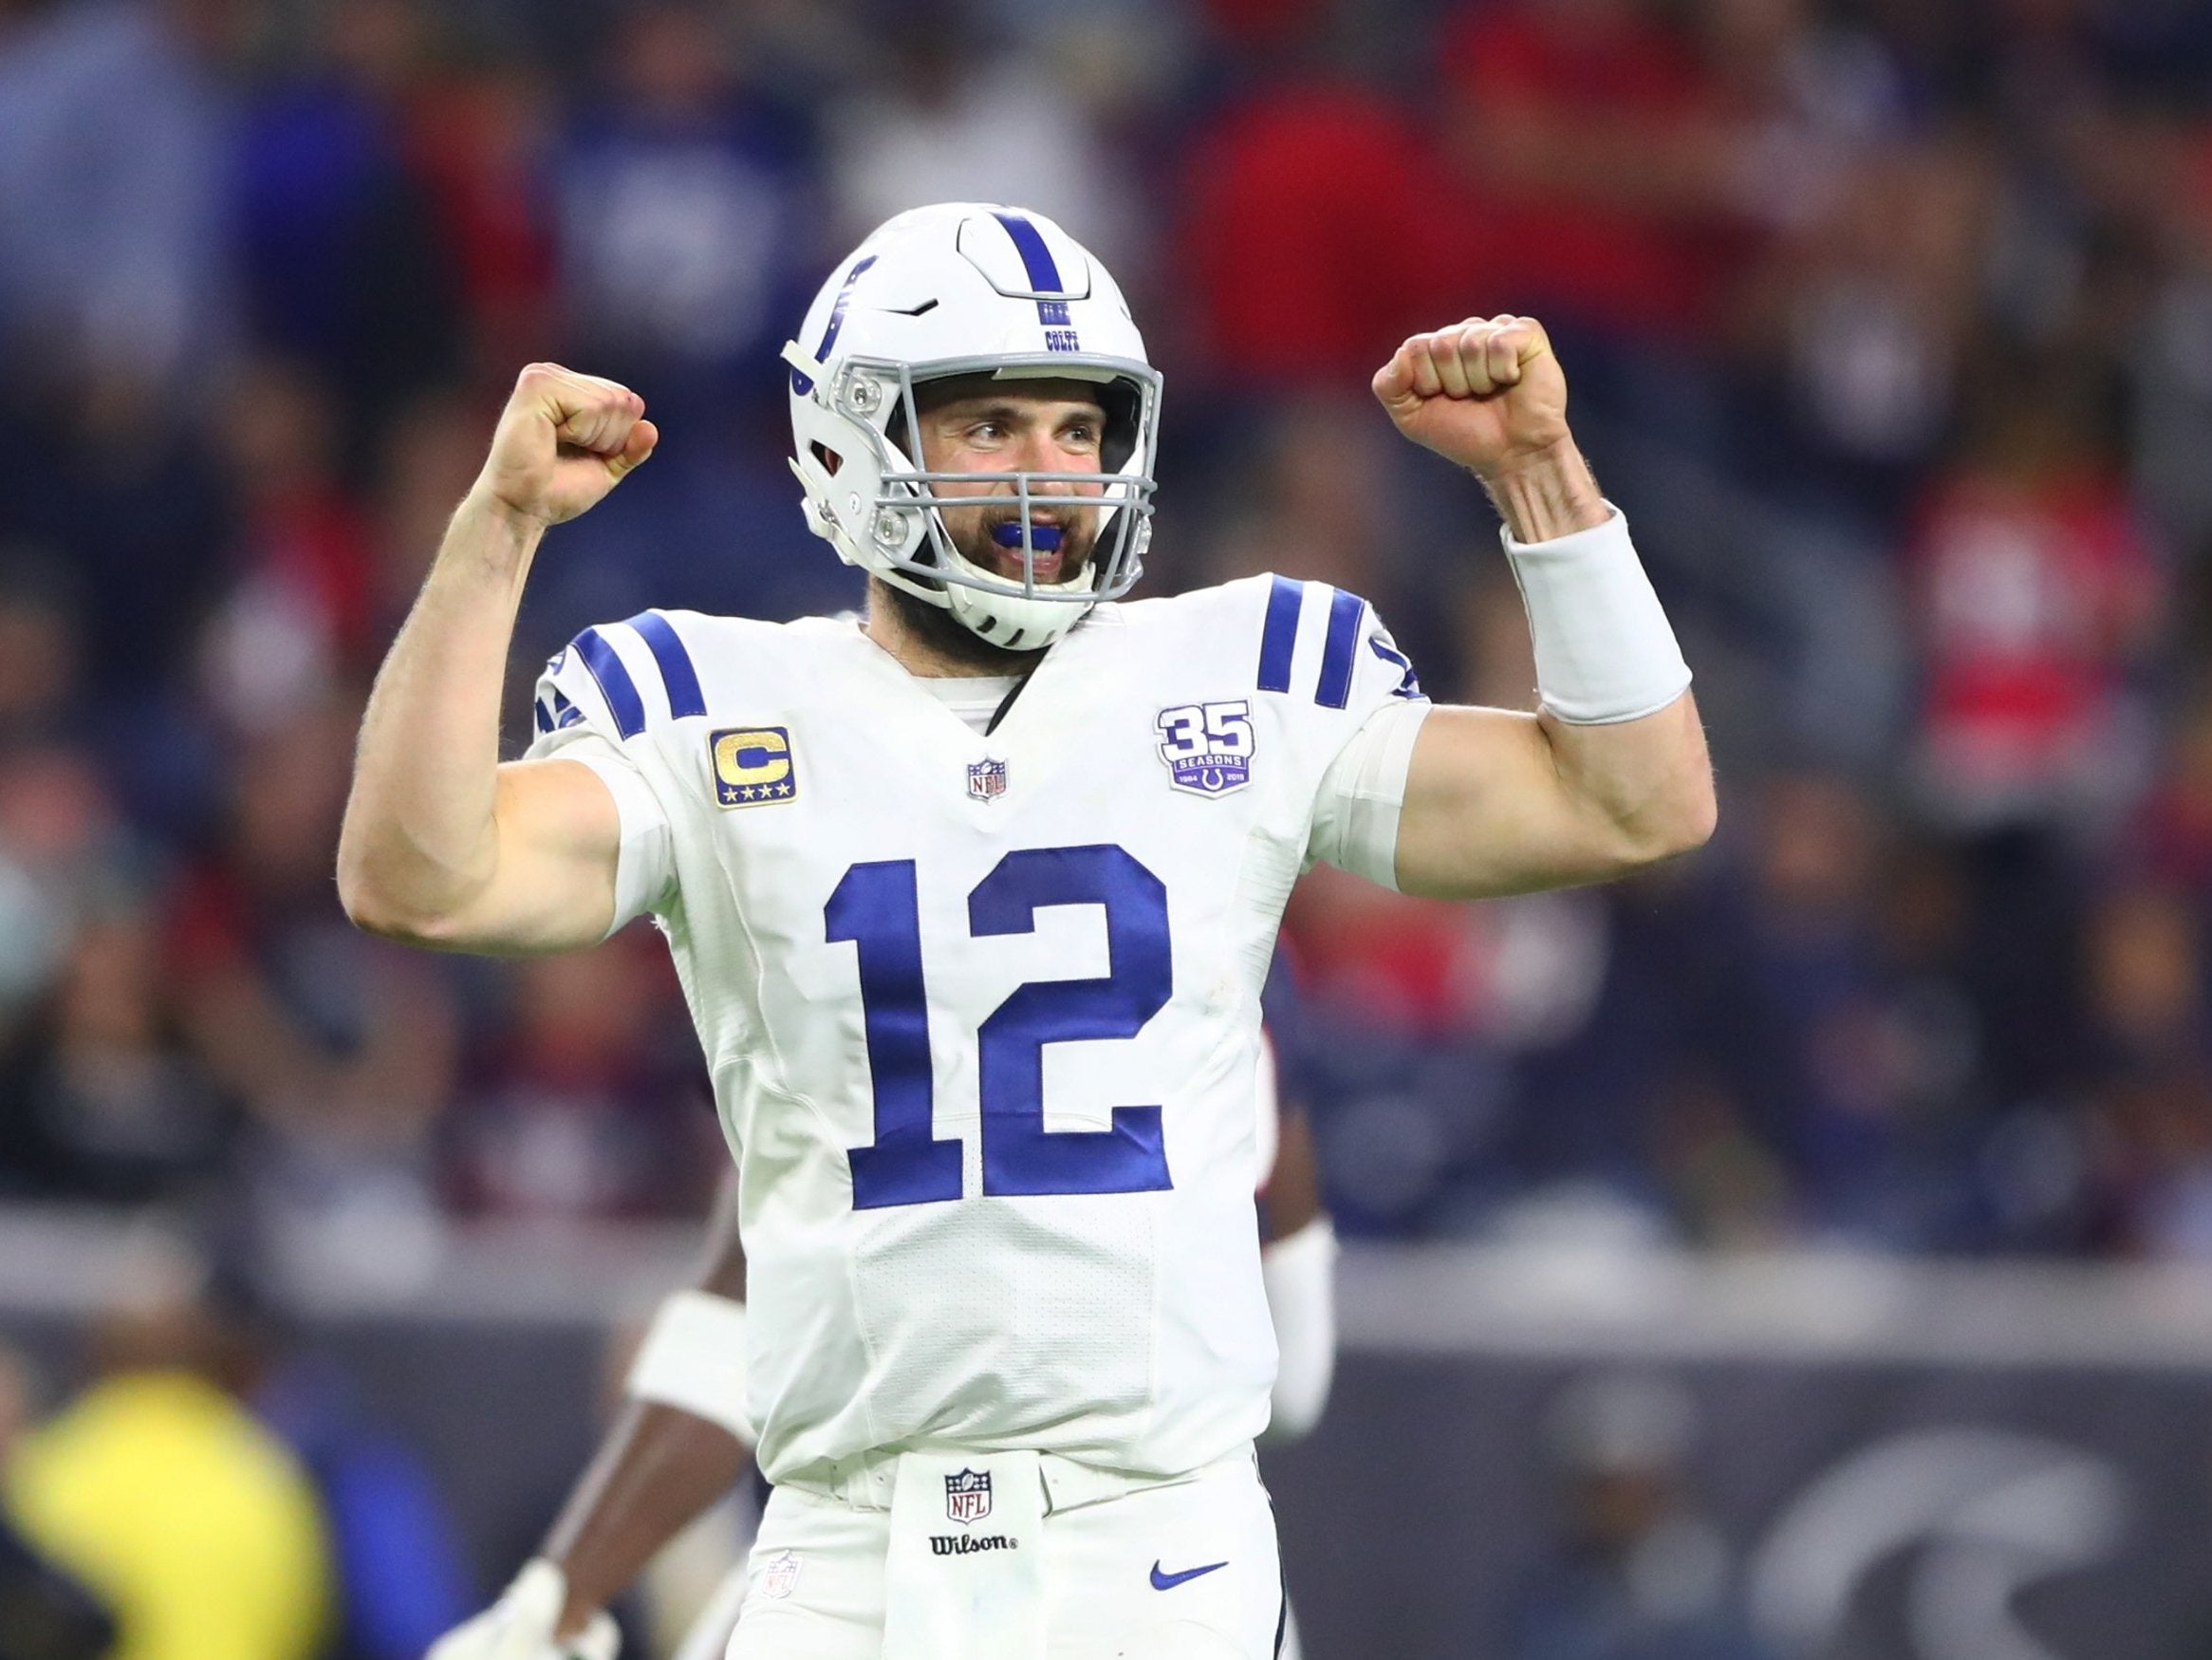 Andrew Luck celebrates in the closing seconds of the Colts' win over the Houston Texans